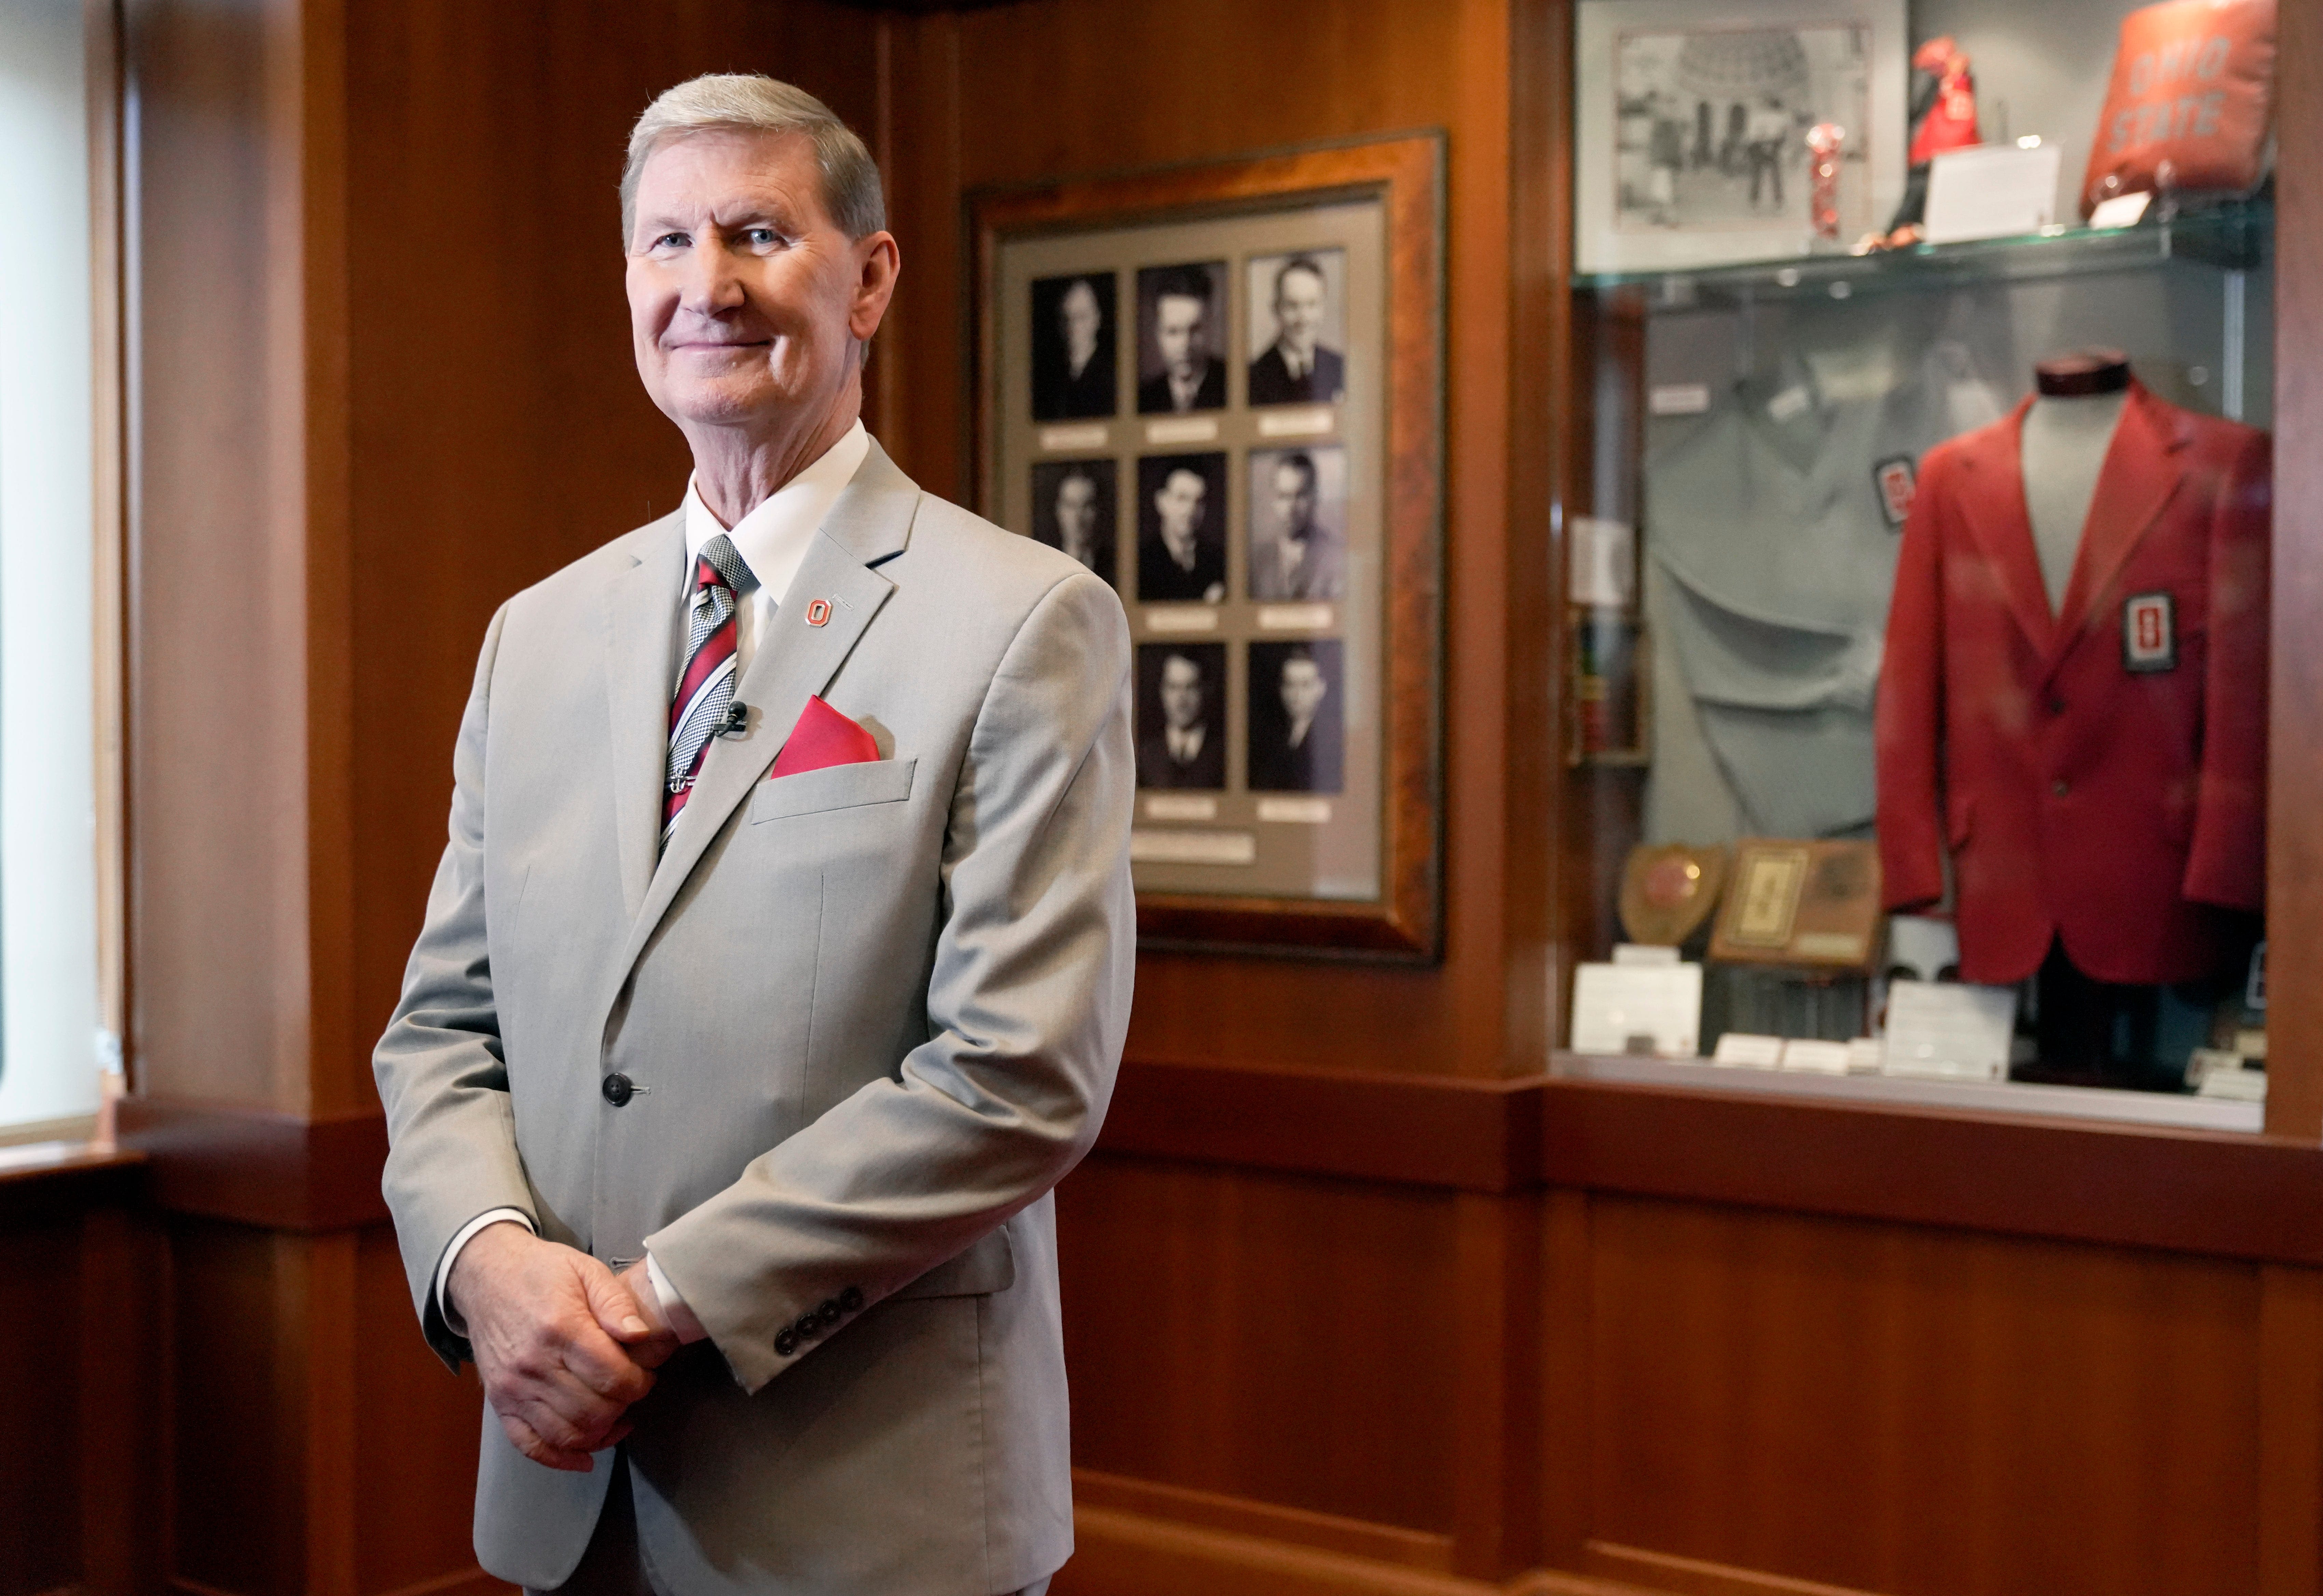 Ohio State President Ted Carter reflects on campus protests, free speech and arrests